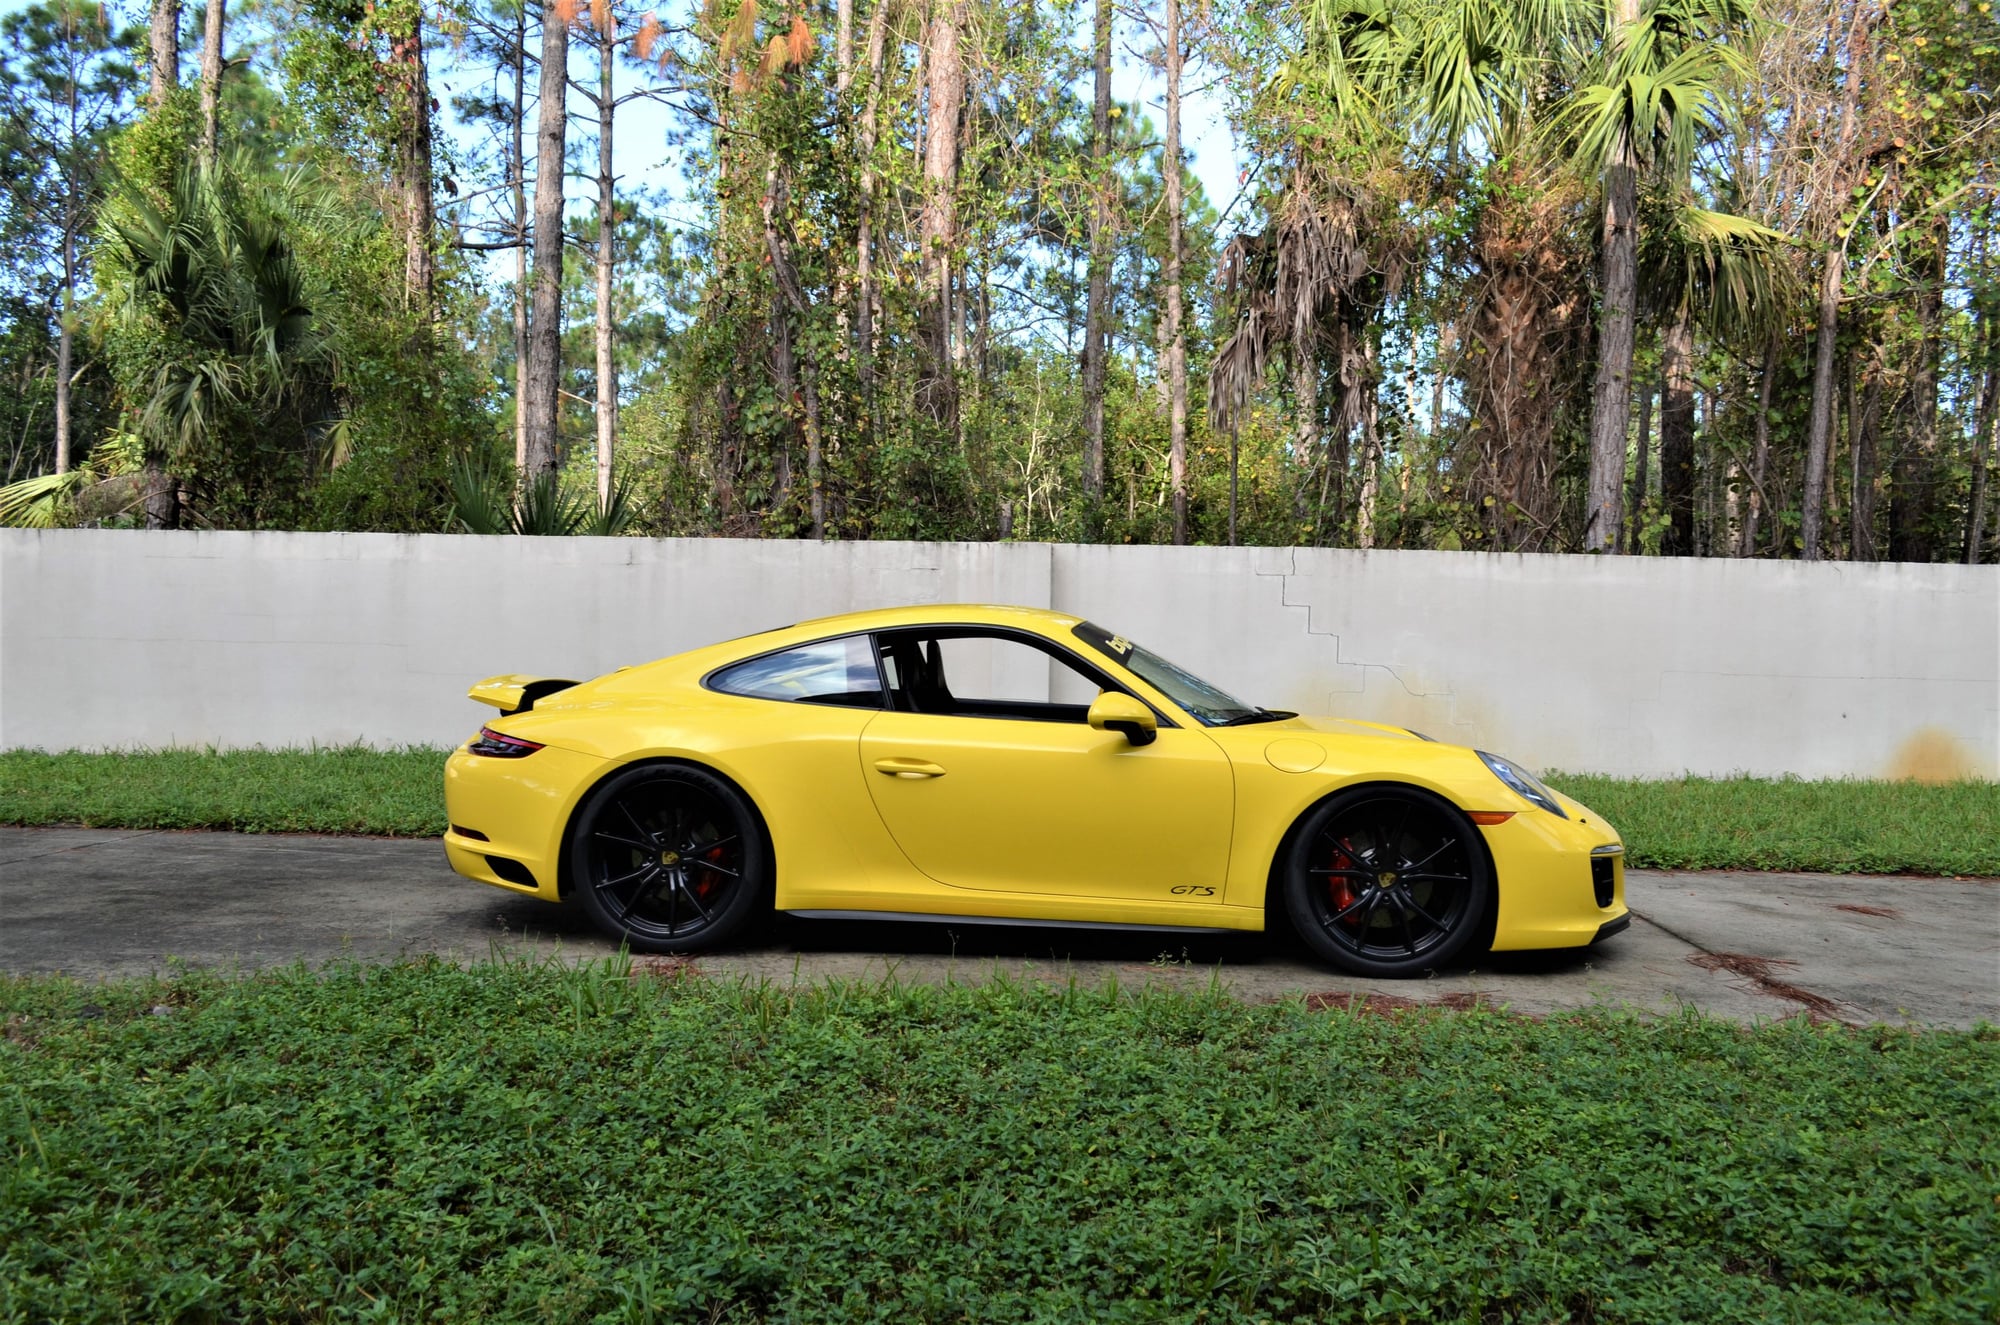 2017 Porsche 911 - 2017 991.2 GTS - Perfect Dual Purpose DE / Street Car - No Additional Upgrades Needed - Used - VIN WP0AB2A90HS124745 - 8,000 Miles - 6 cyl - 2WD - Automatic - Coupe - Yellow - Ormond Beach, FL 32174, United States